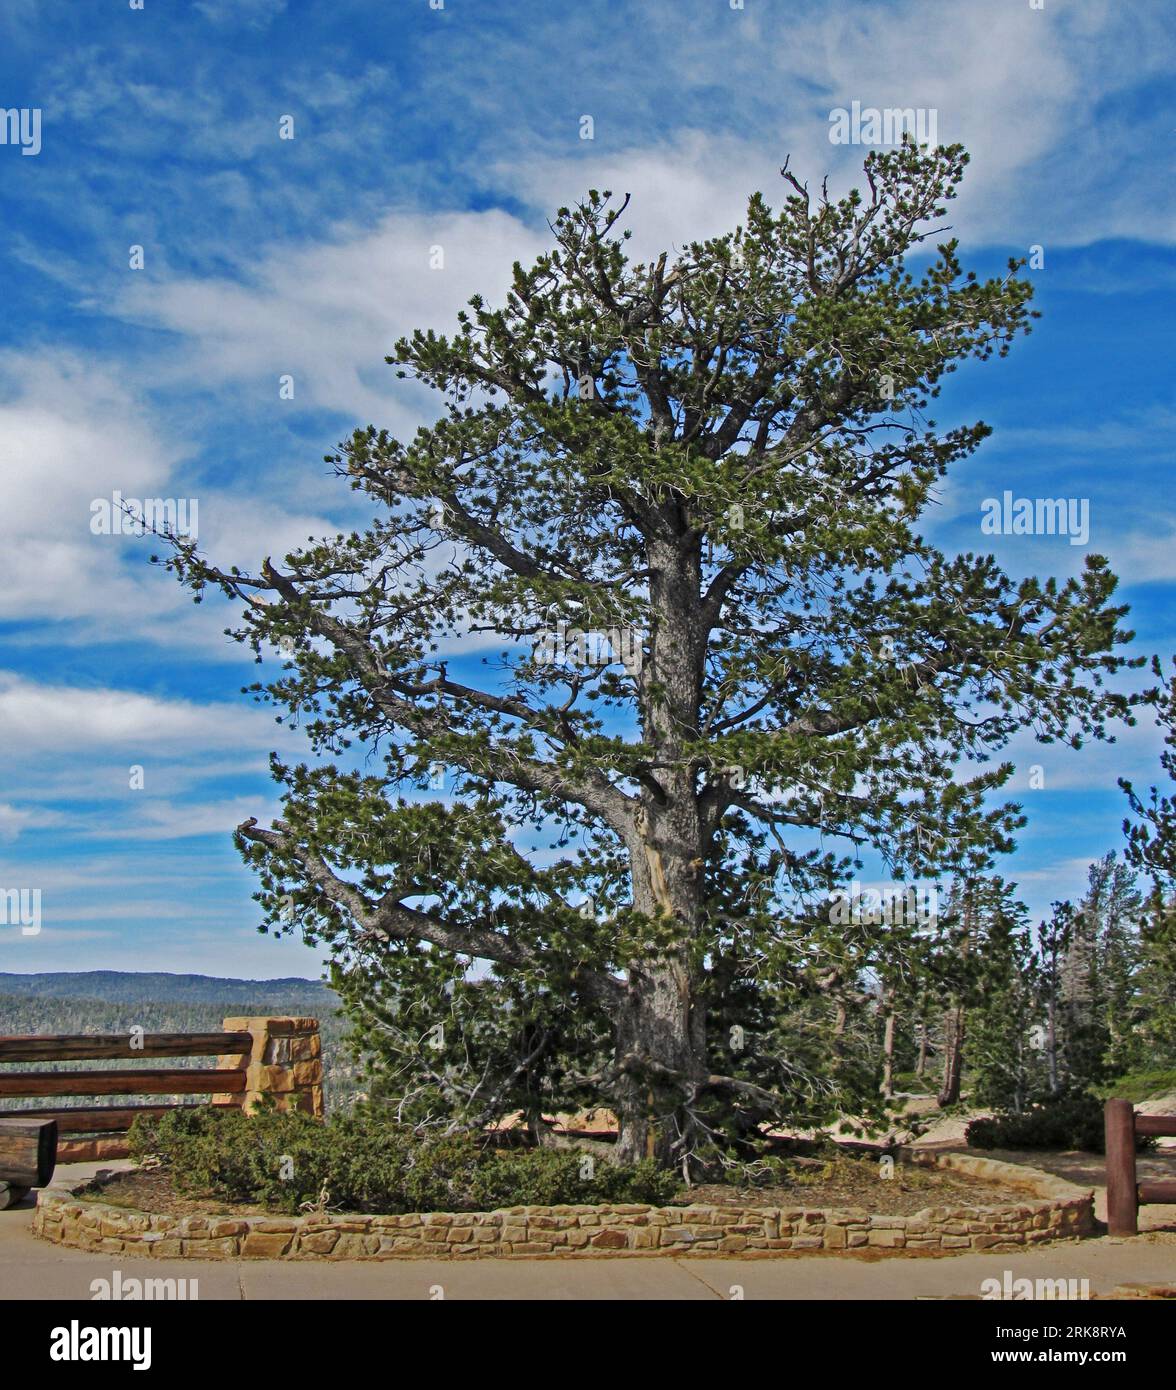 A single large, old, Limber Pine, Pinus Flexilis, standing on its own at one of the viewpoints of Bryce Canyon National Park Stock Photo